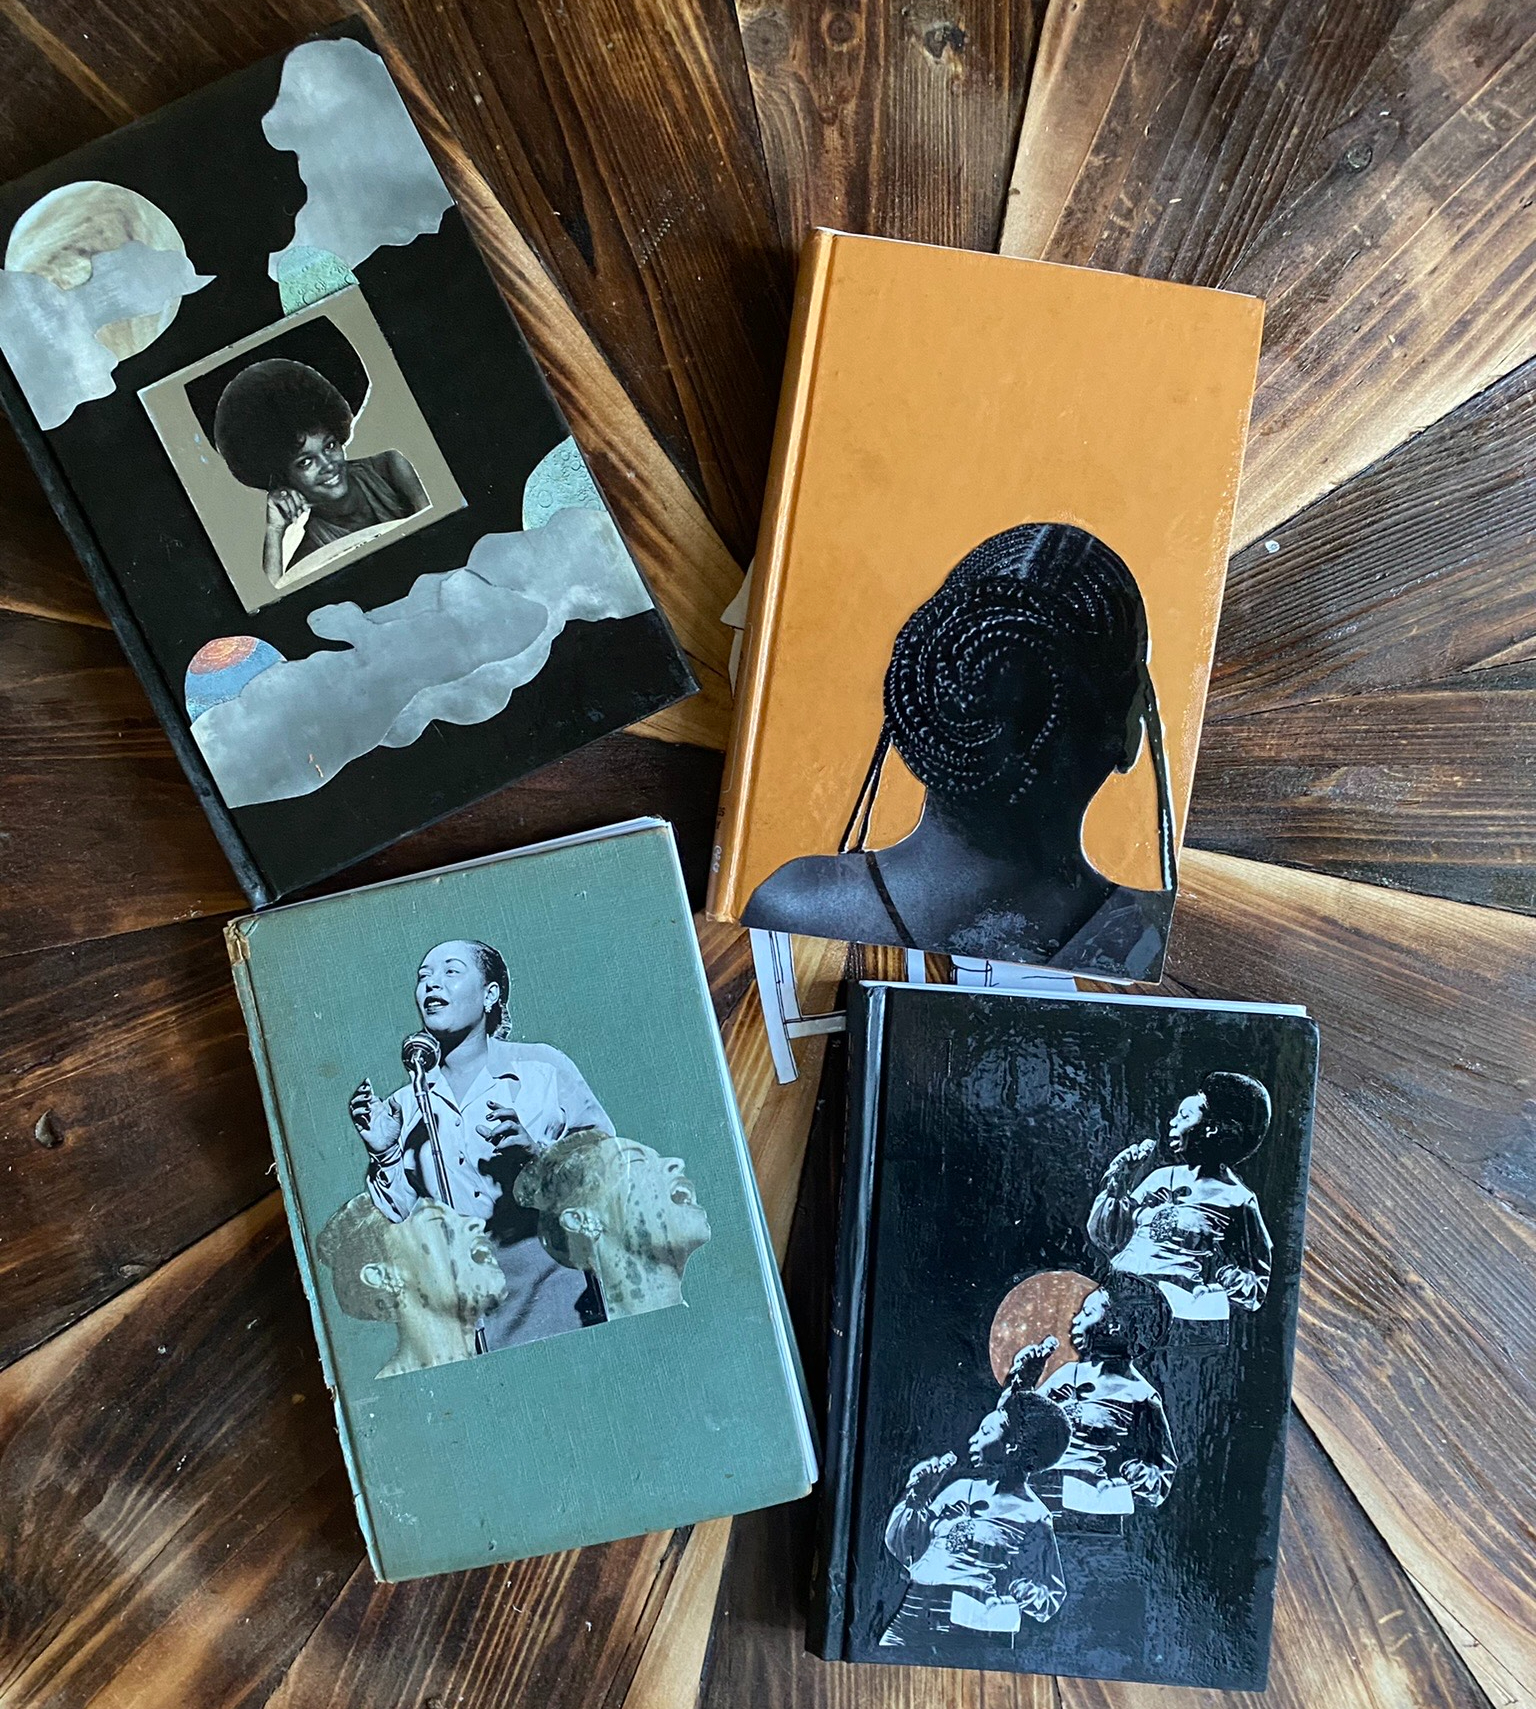 Four journals sit on a wood table. In the upper left corner, a black journal features a collage of clouds, the moon, and a Black woman. In the upper right corner, a yellow journal features an image of the back of a Black woman's head, with her hair braided into small braids and those braids twisted into a bun. In the lower right corner, a black journal features a collage of a woman singing. In the lower left corner, a green journal features a collage of another woman singing.